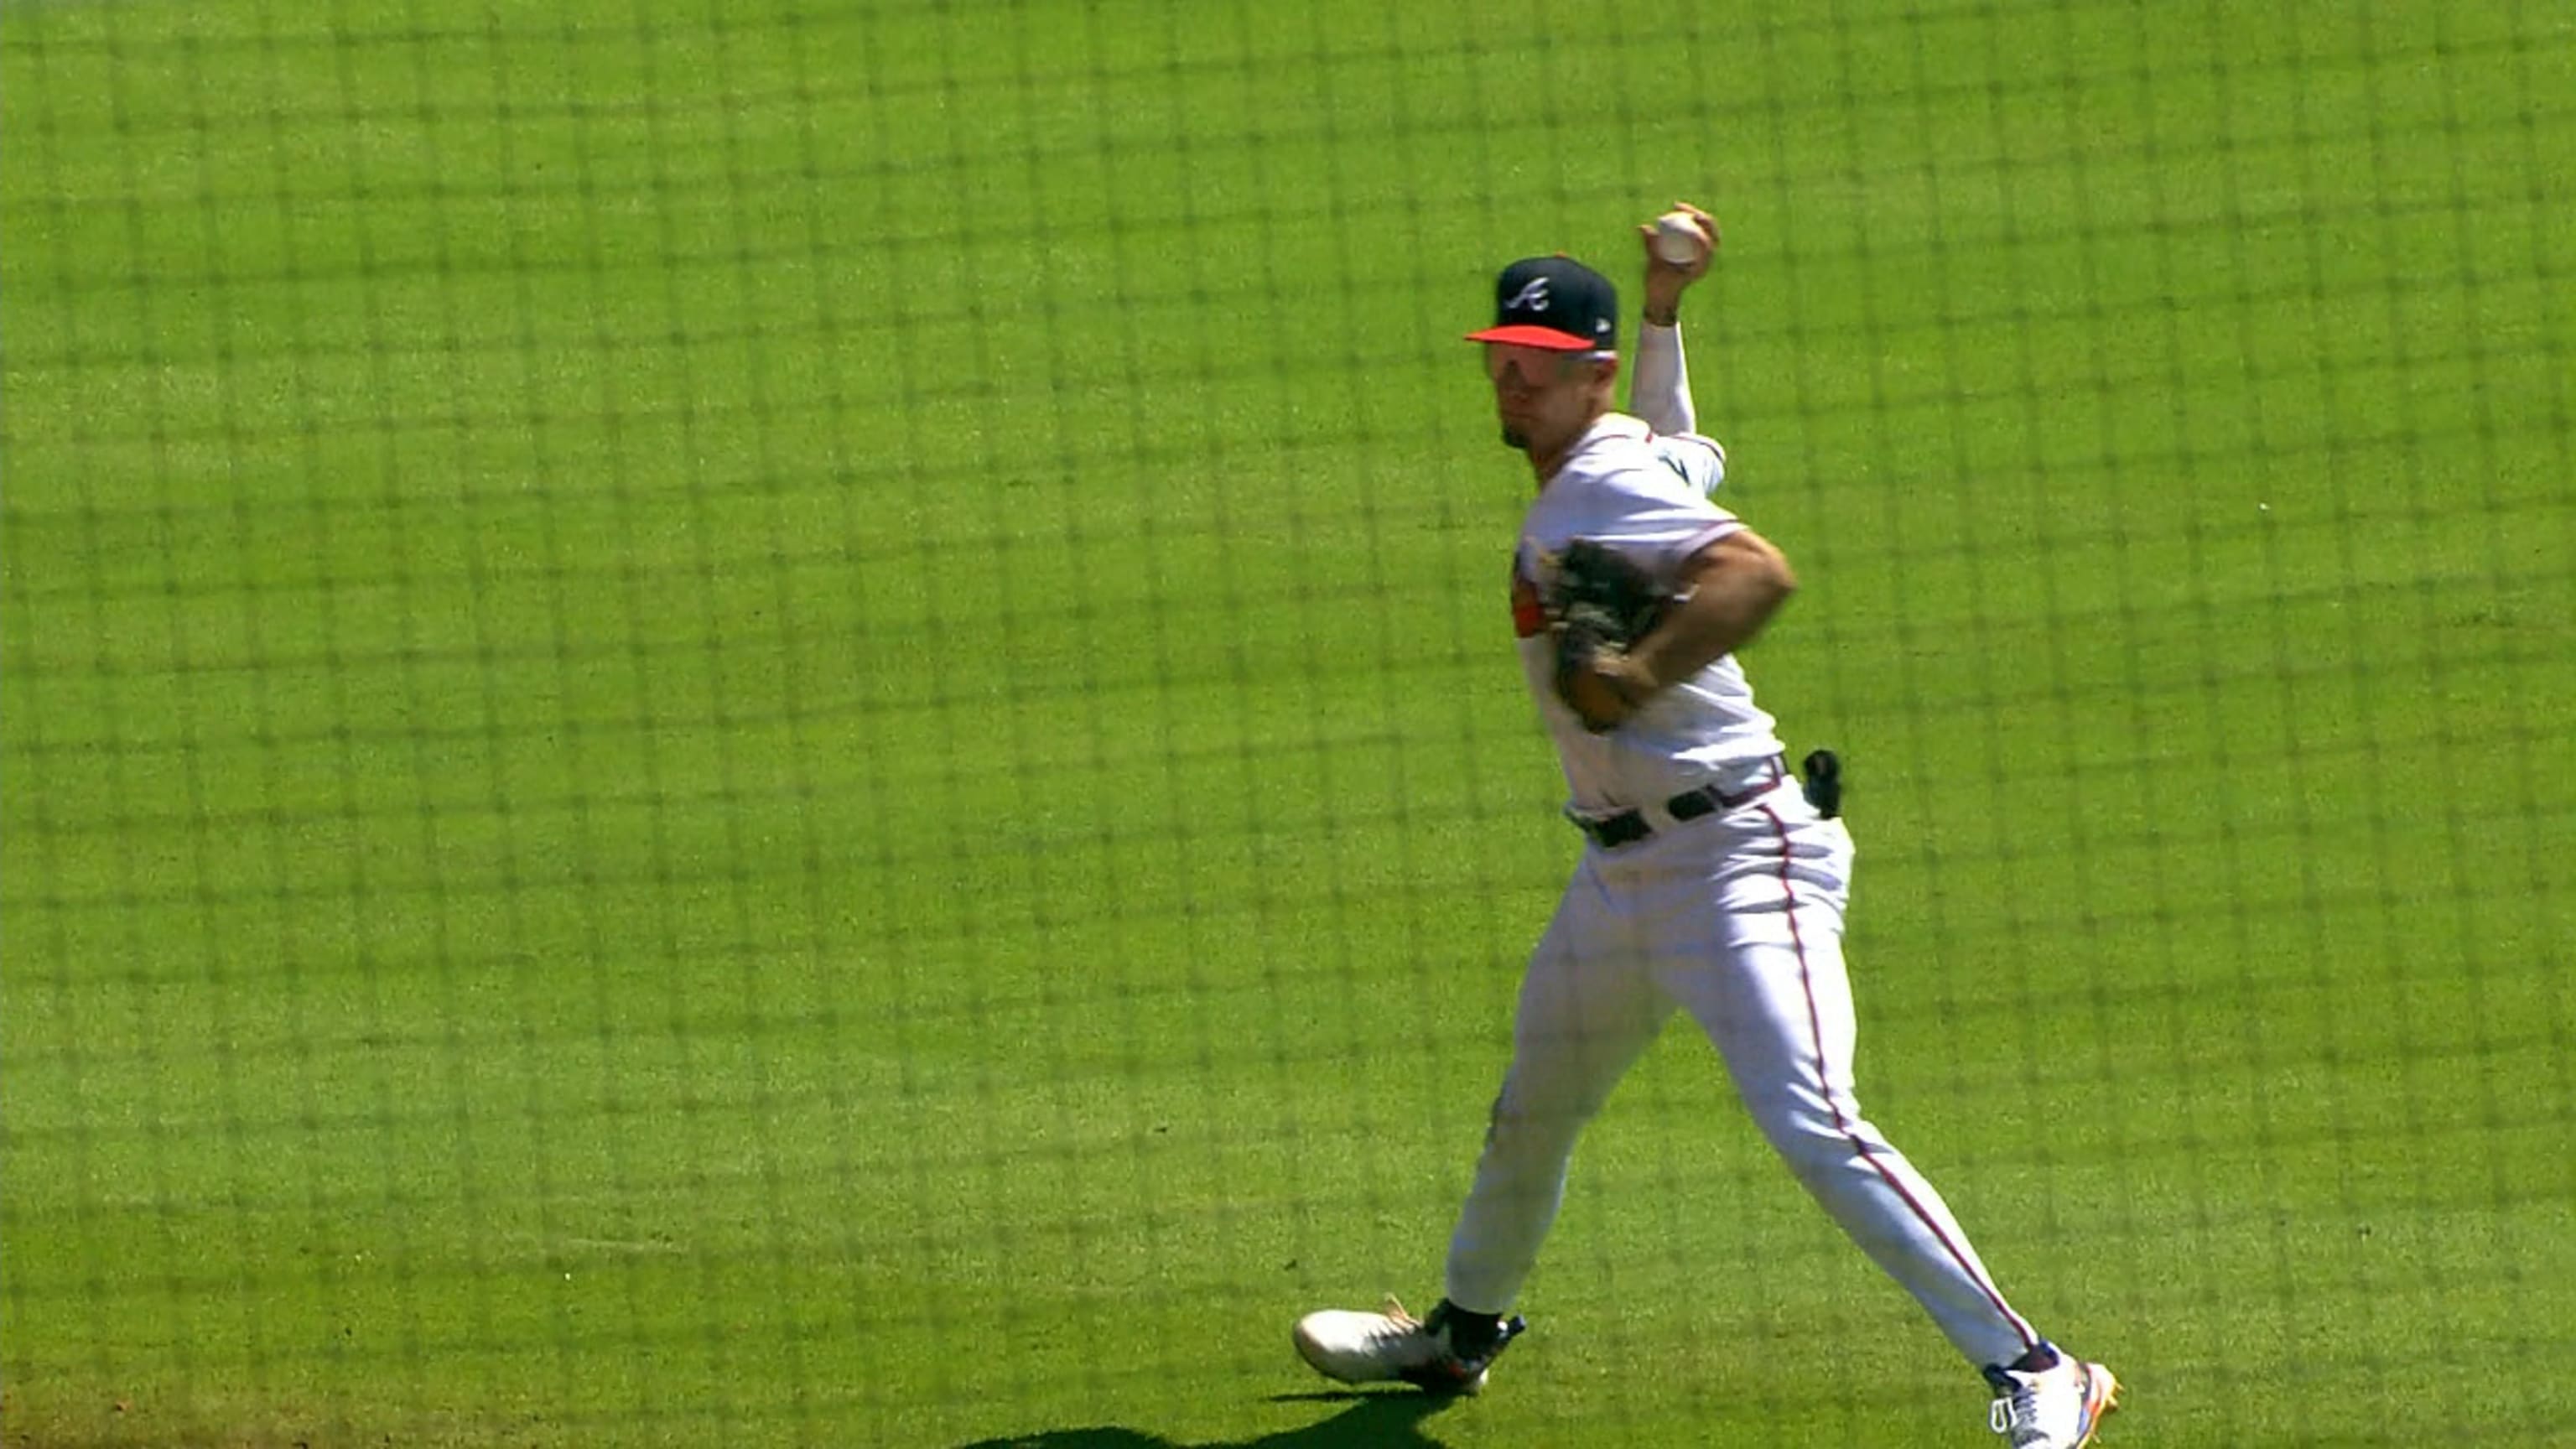 Braves have Ron Washington working with their potential shortstop